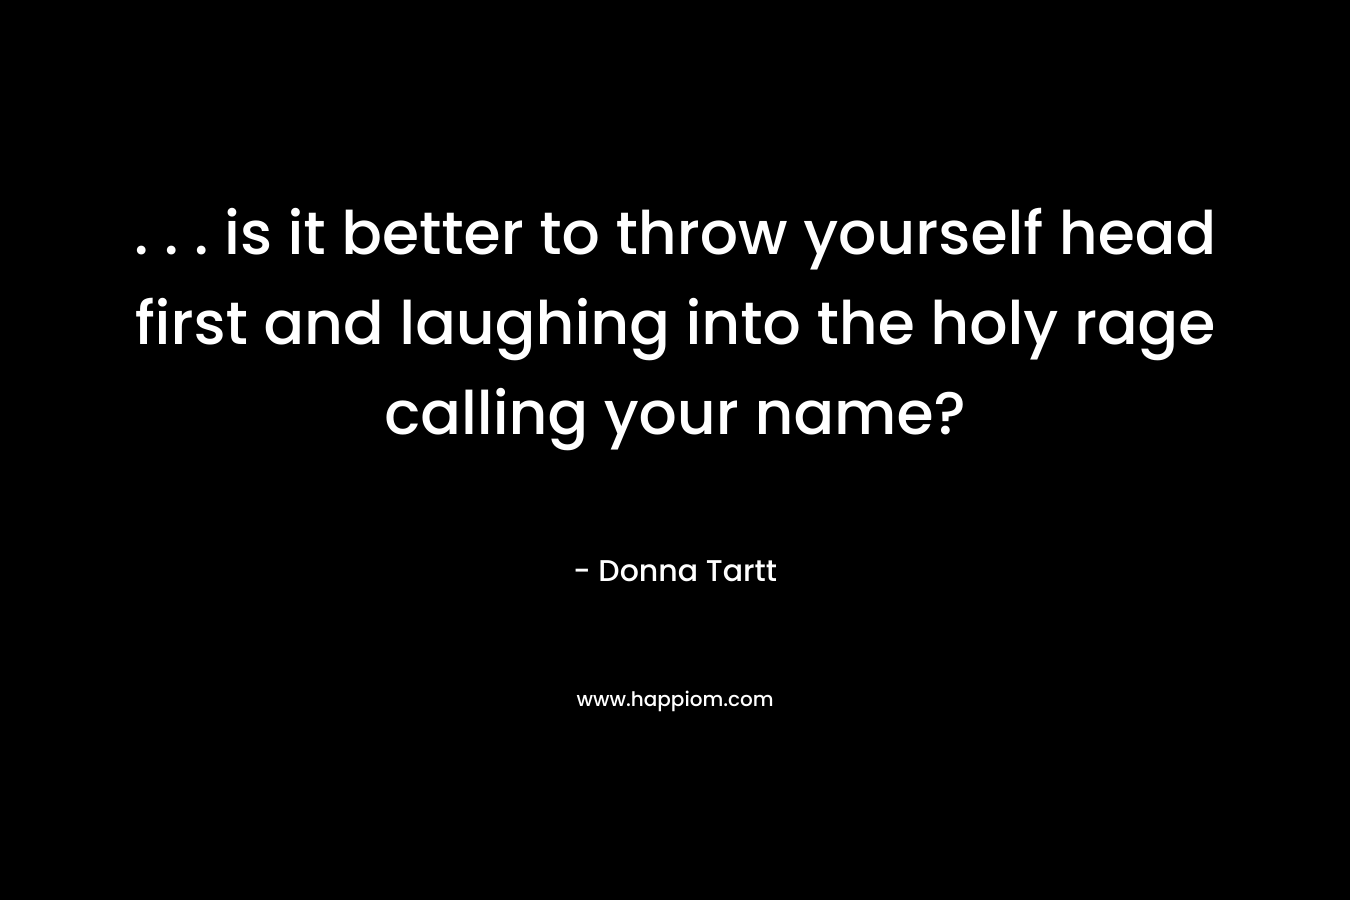 . . . is it better to throw yourself head first and laughing into the holy rage calling your name? – Donna Tartt